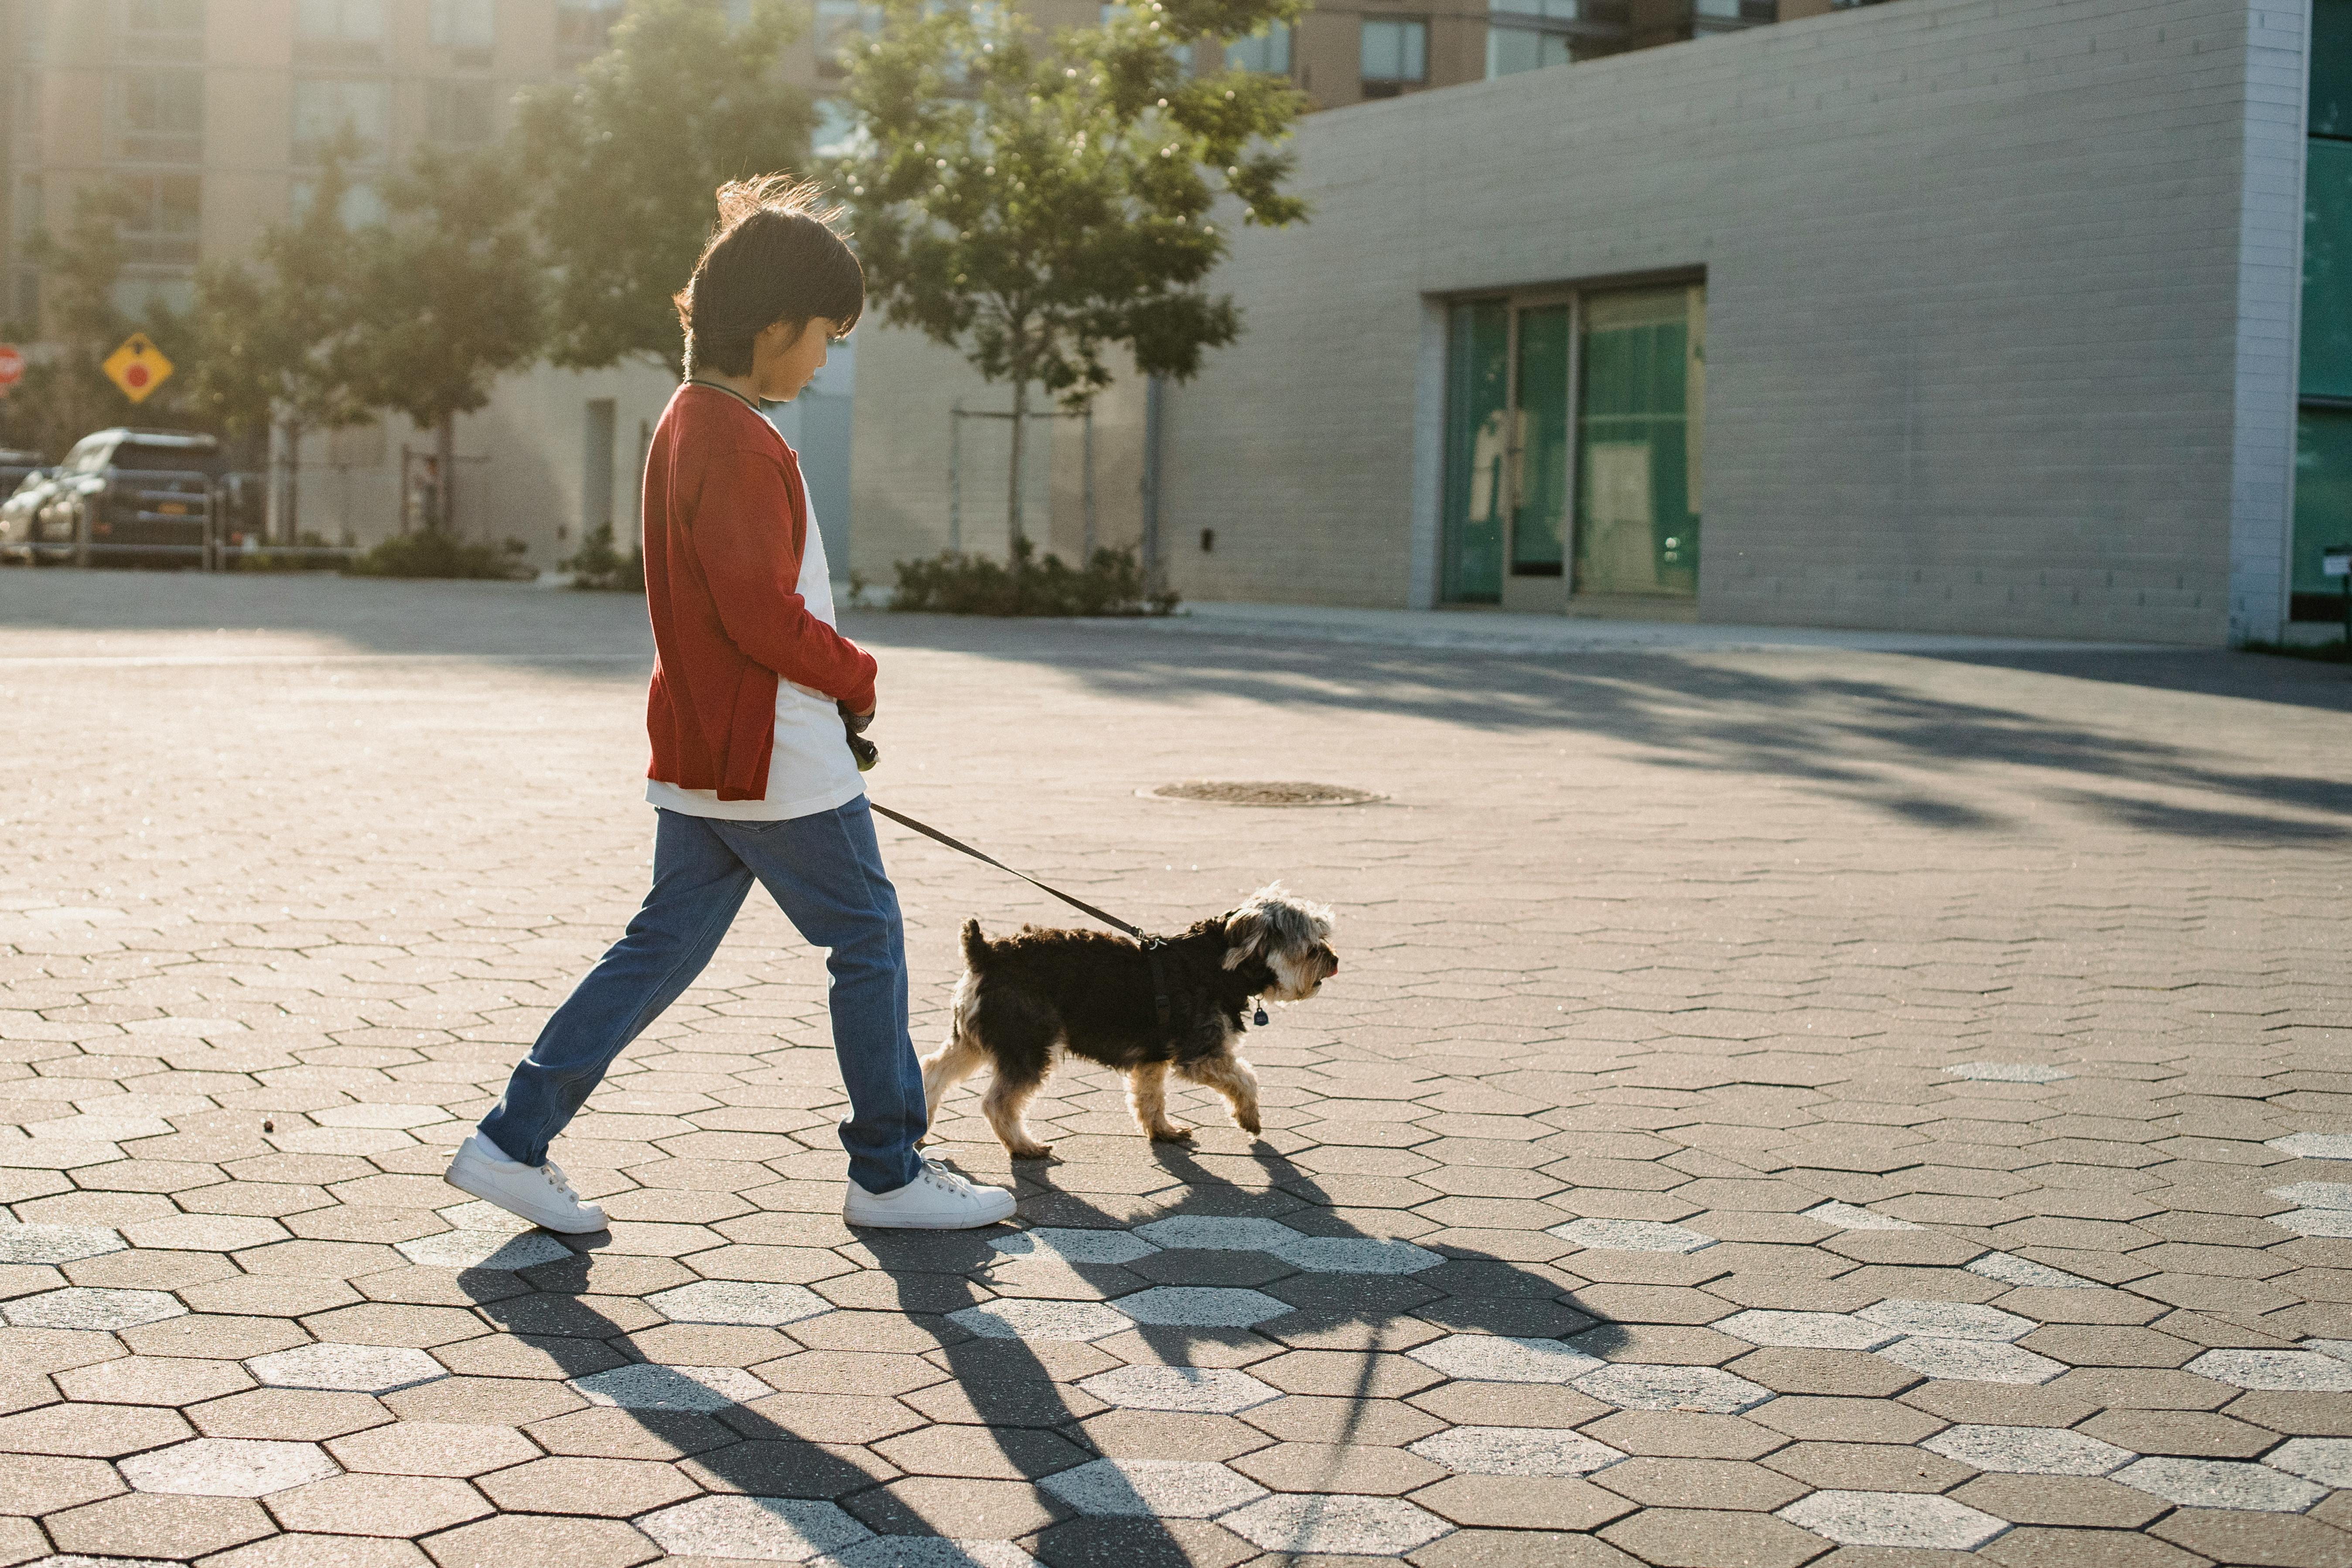 A boy and his dog walking in the street. | Photo: Pexels